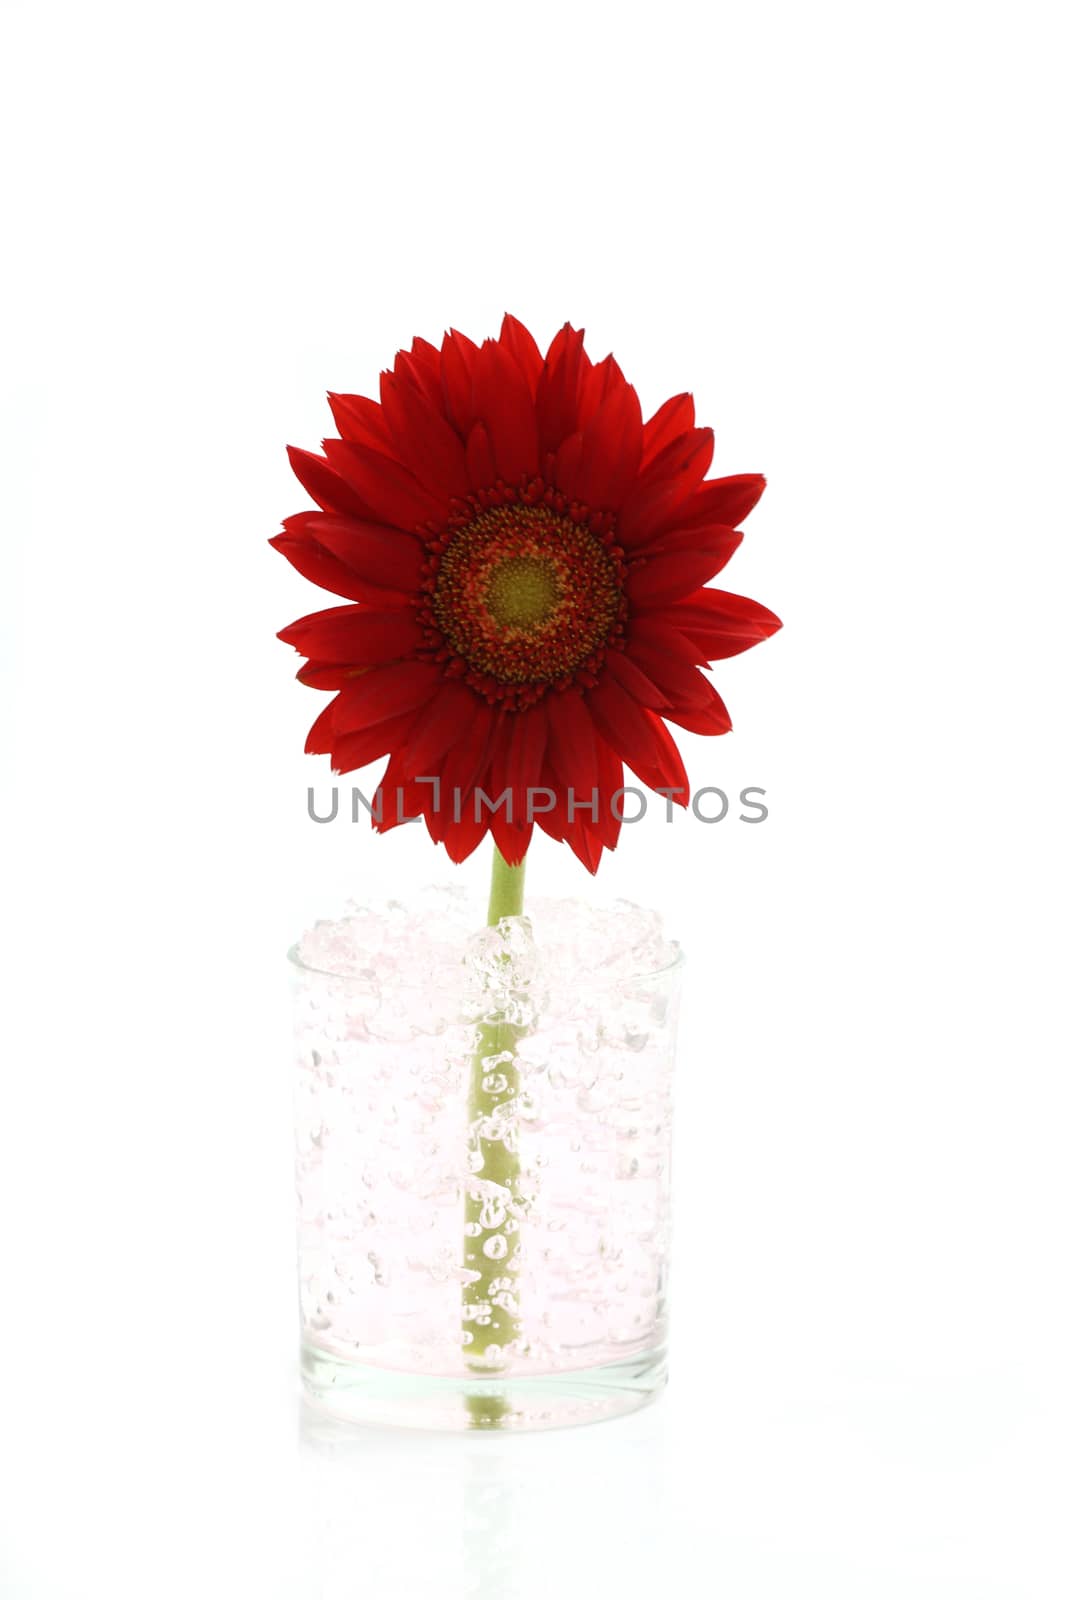 Red flower isolated in white background by piyato